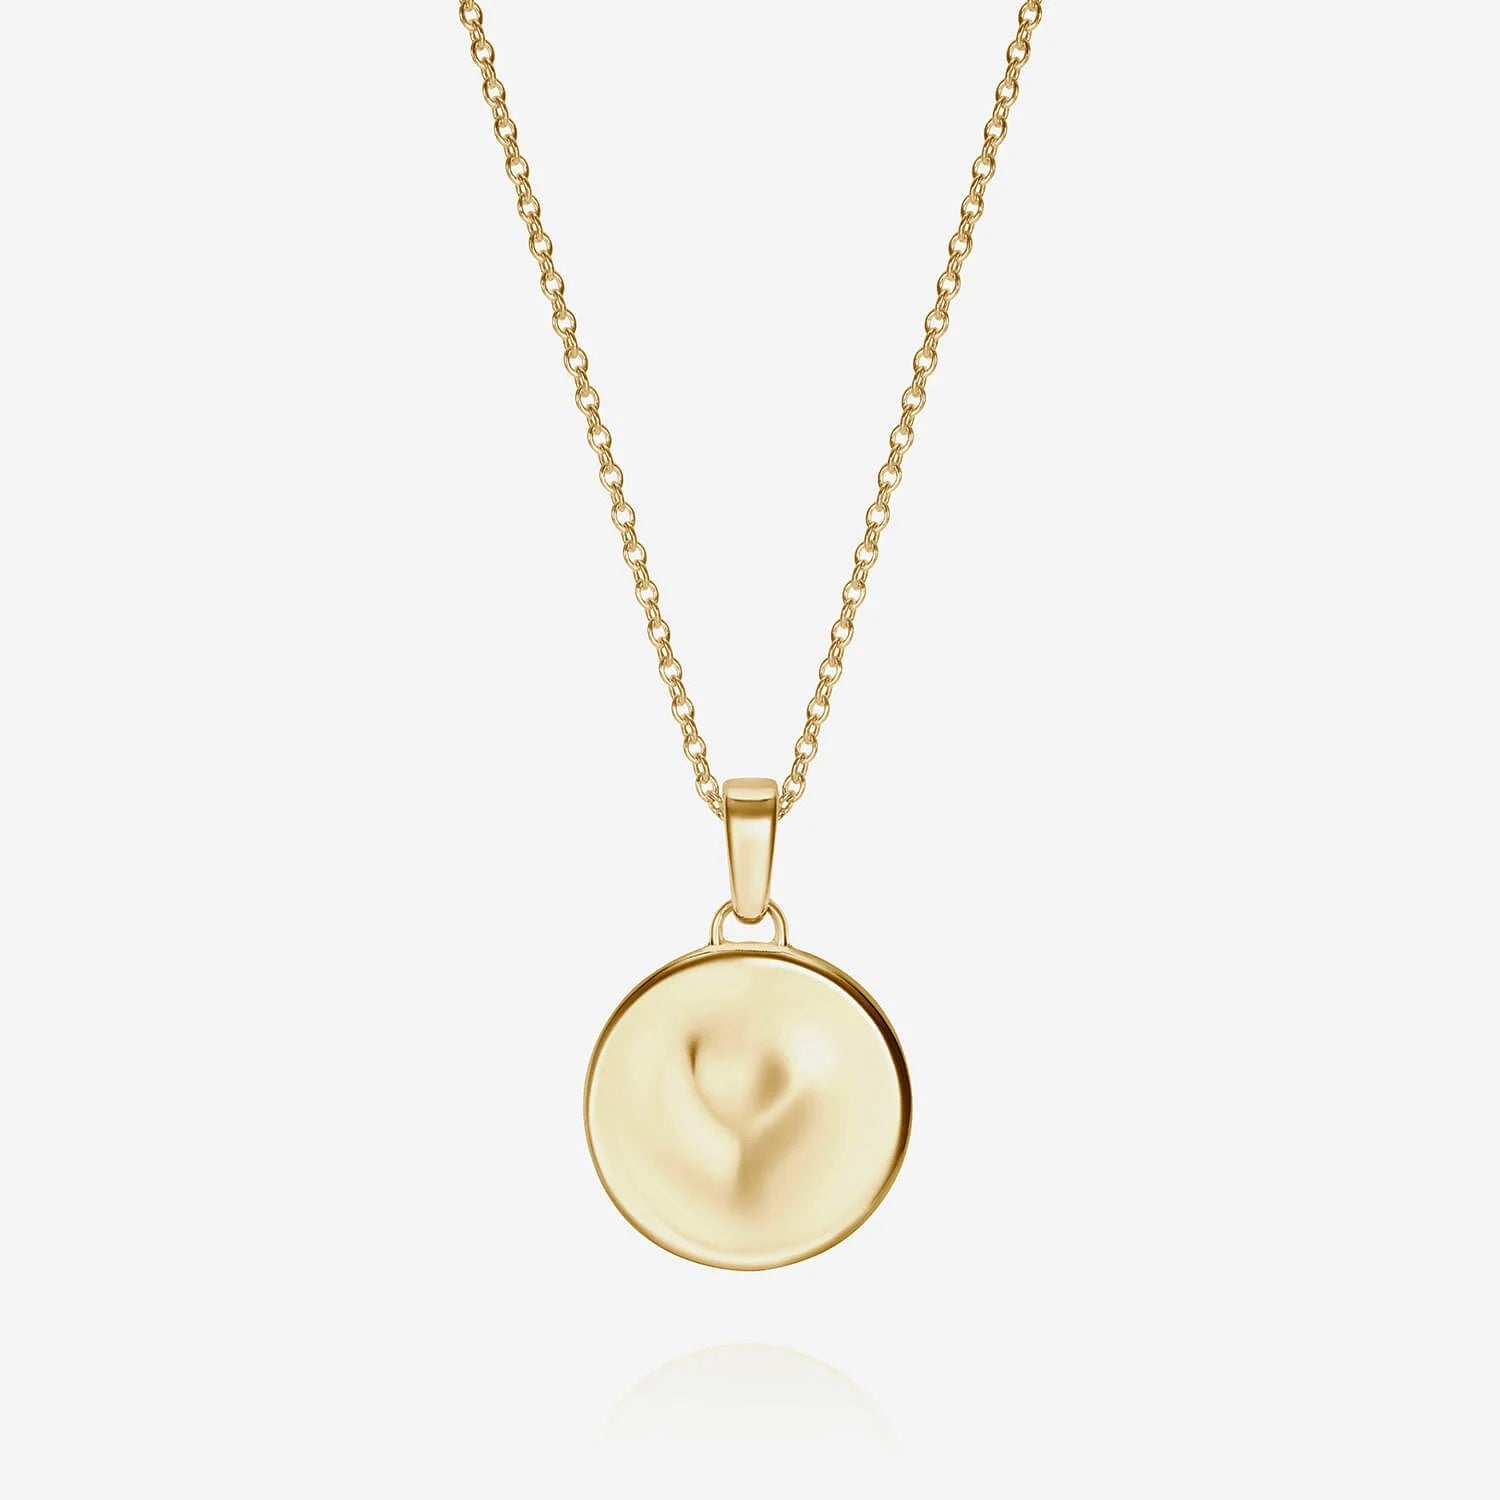 886 Royal Mint Necklaces 886 Caustic Heart Pendant with Chain in 18ct Yellow Gold